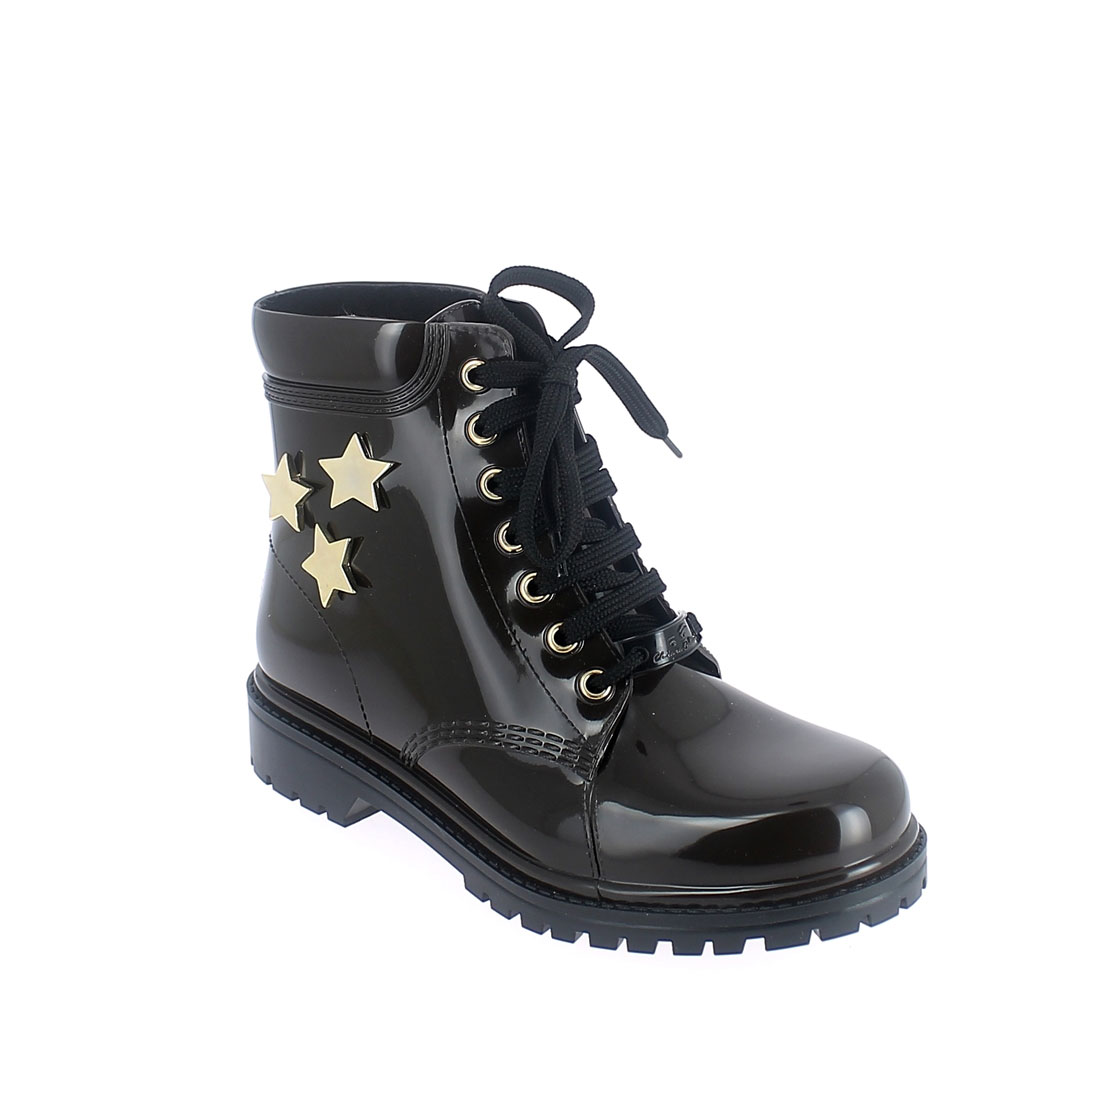 Short laced up walking boot in testa di moro pvc with gold stars